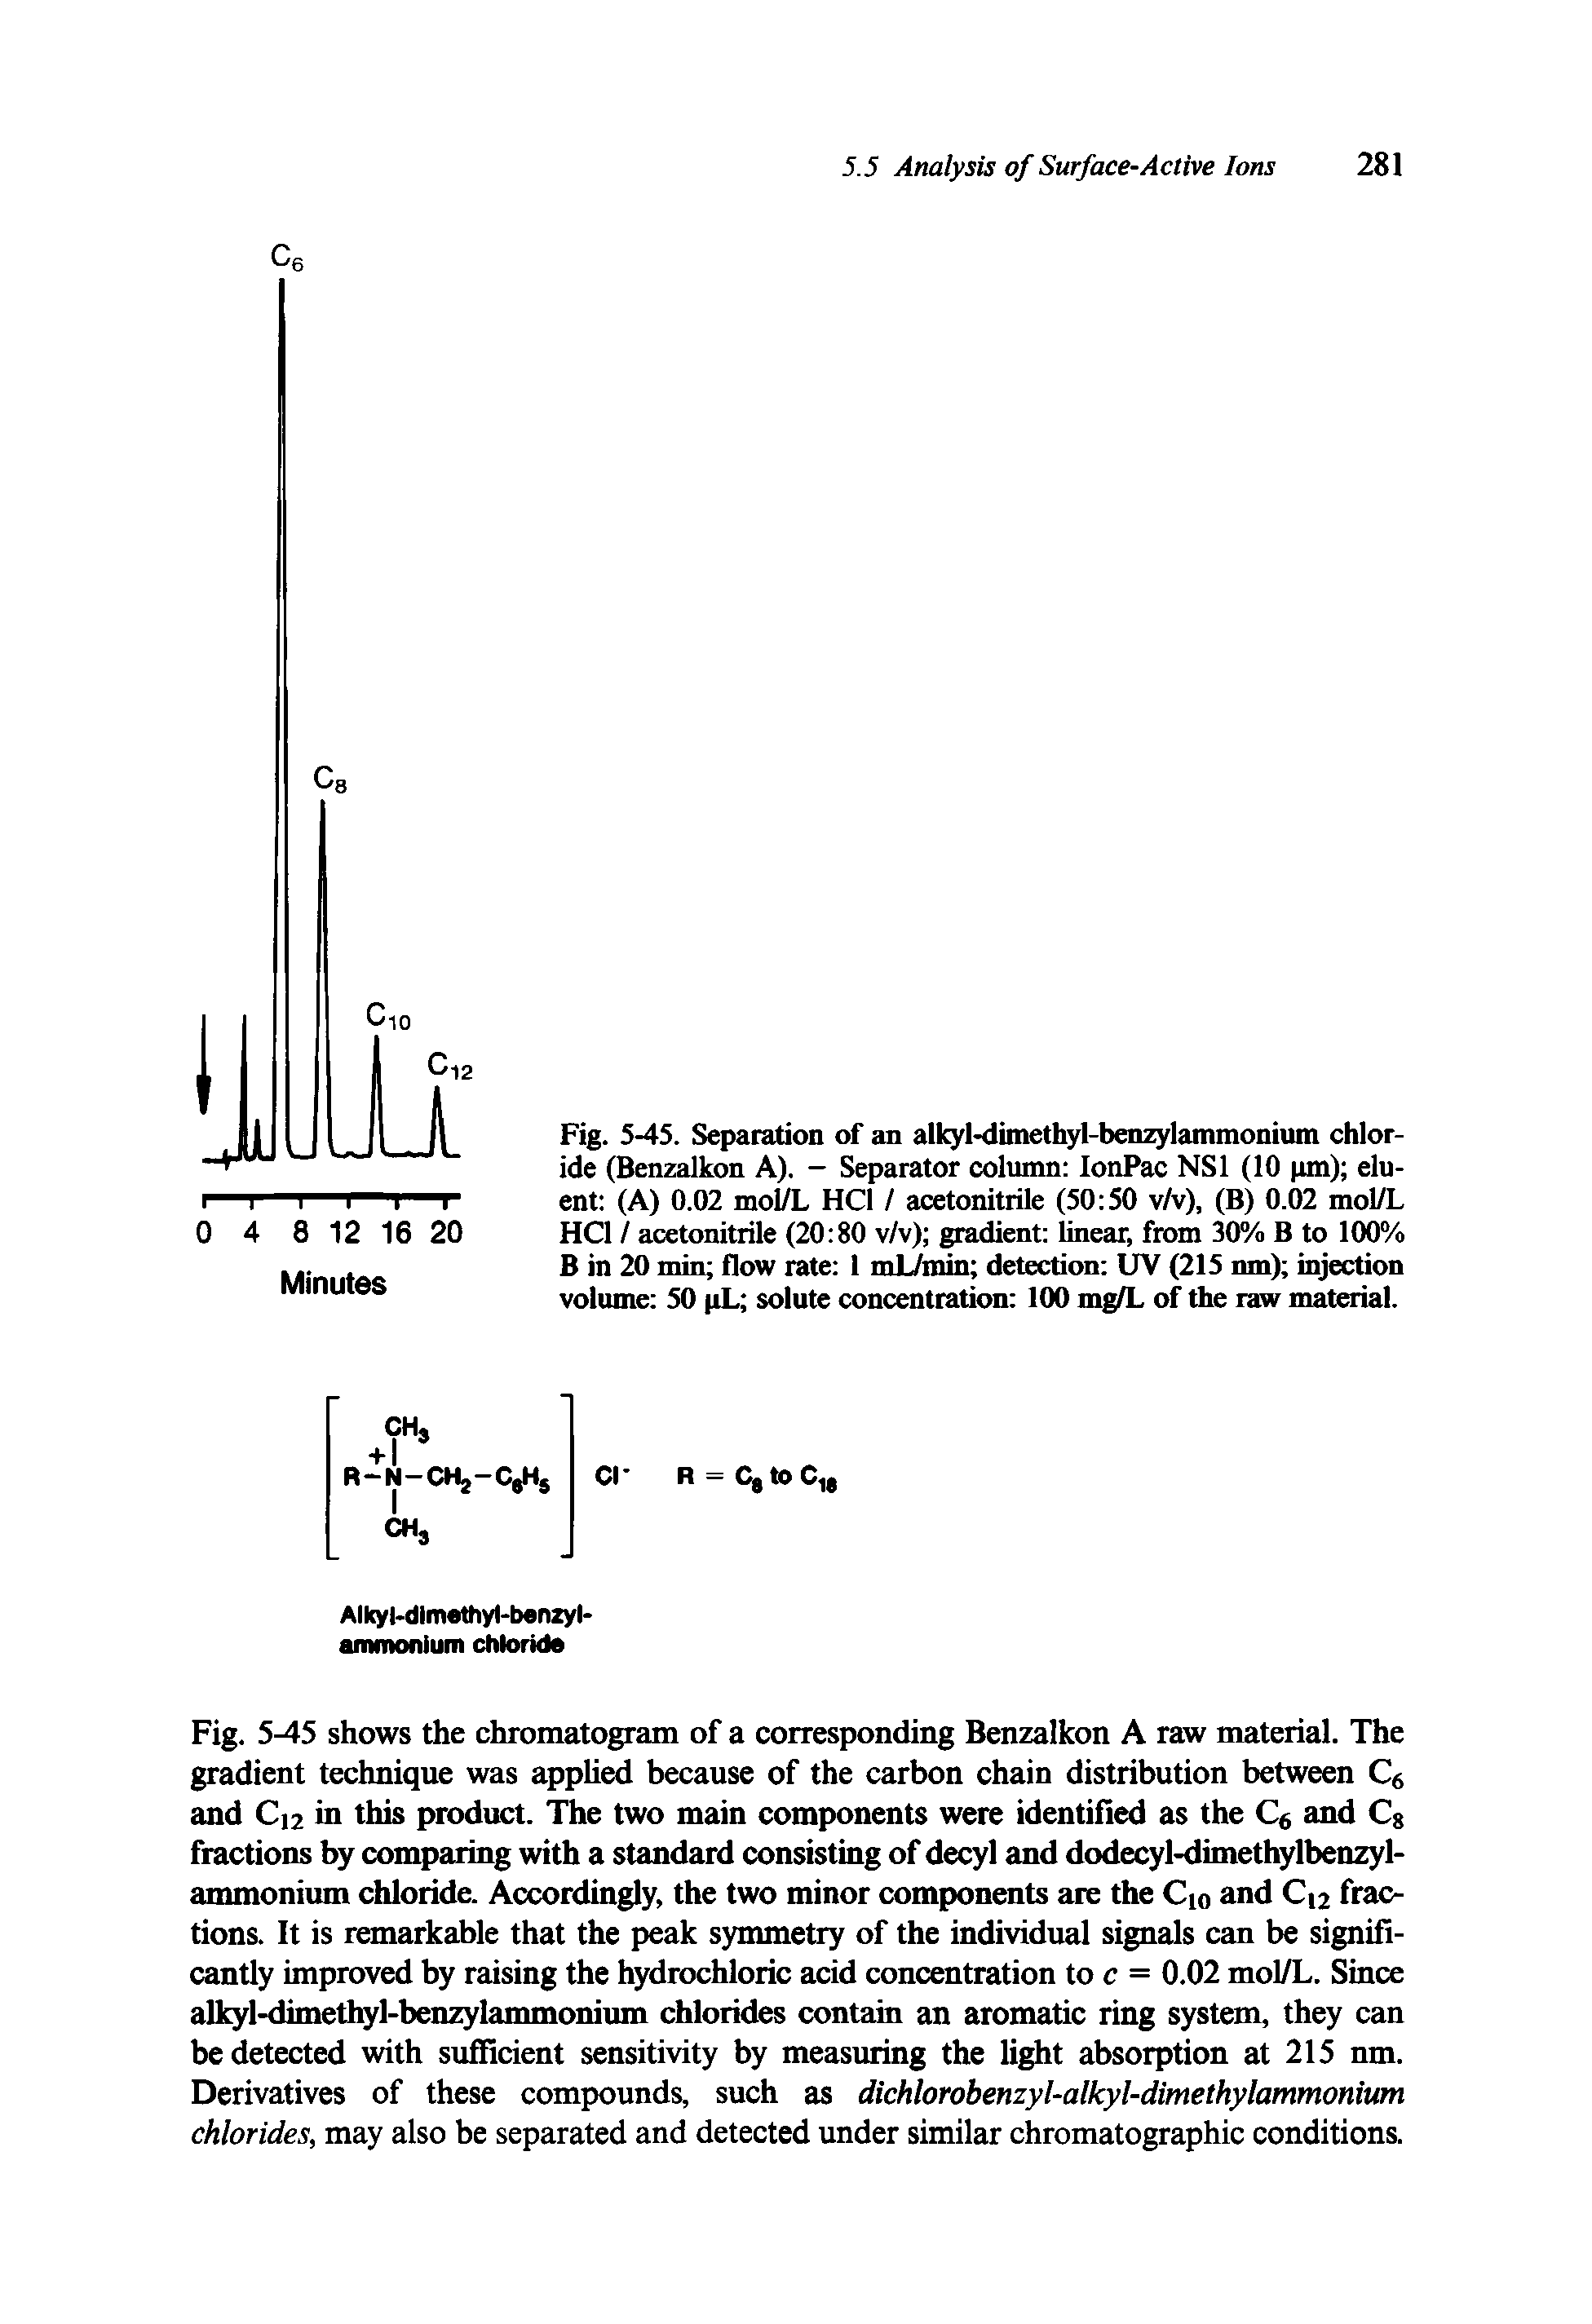 Fig. 5-45. Separation of an alkyl-dimethyl-benzylammonium chloride (Benzalkon A). - Separator column IonPac NS1 (10 pm) eluent (A) 0.02 mol/L HC1 / acetonitrile (50 50 v/v), (B) 0.02 mol/L HC1 / acetonitrile (20 80 v/v) gradient linear, from 30% B to 100% B in 20 min flow rate 1 mL/min detection UV (215 nm) injection volume 50 pL solute concentration 100 mg/L of the raw material.